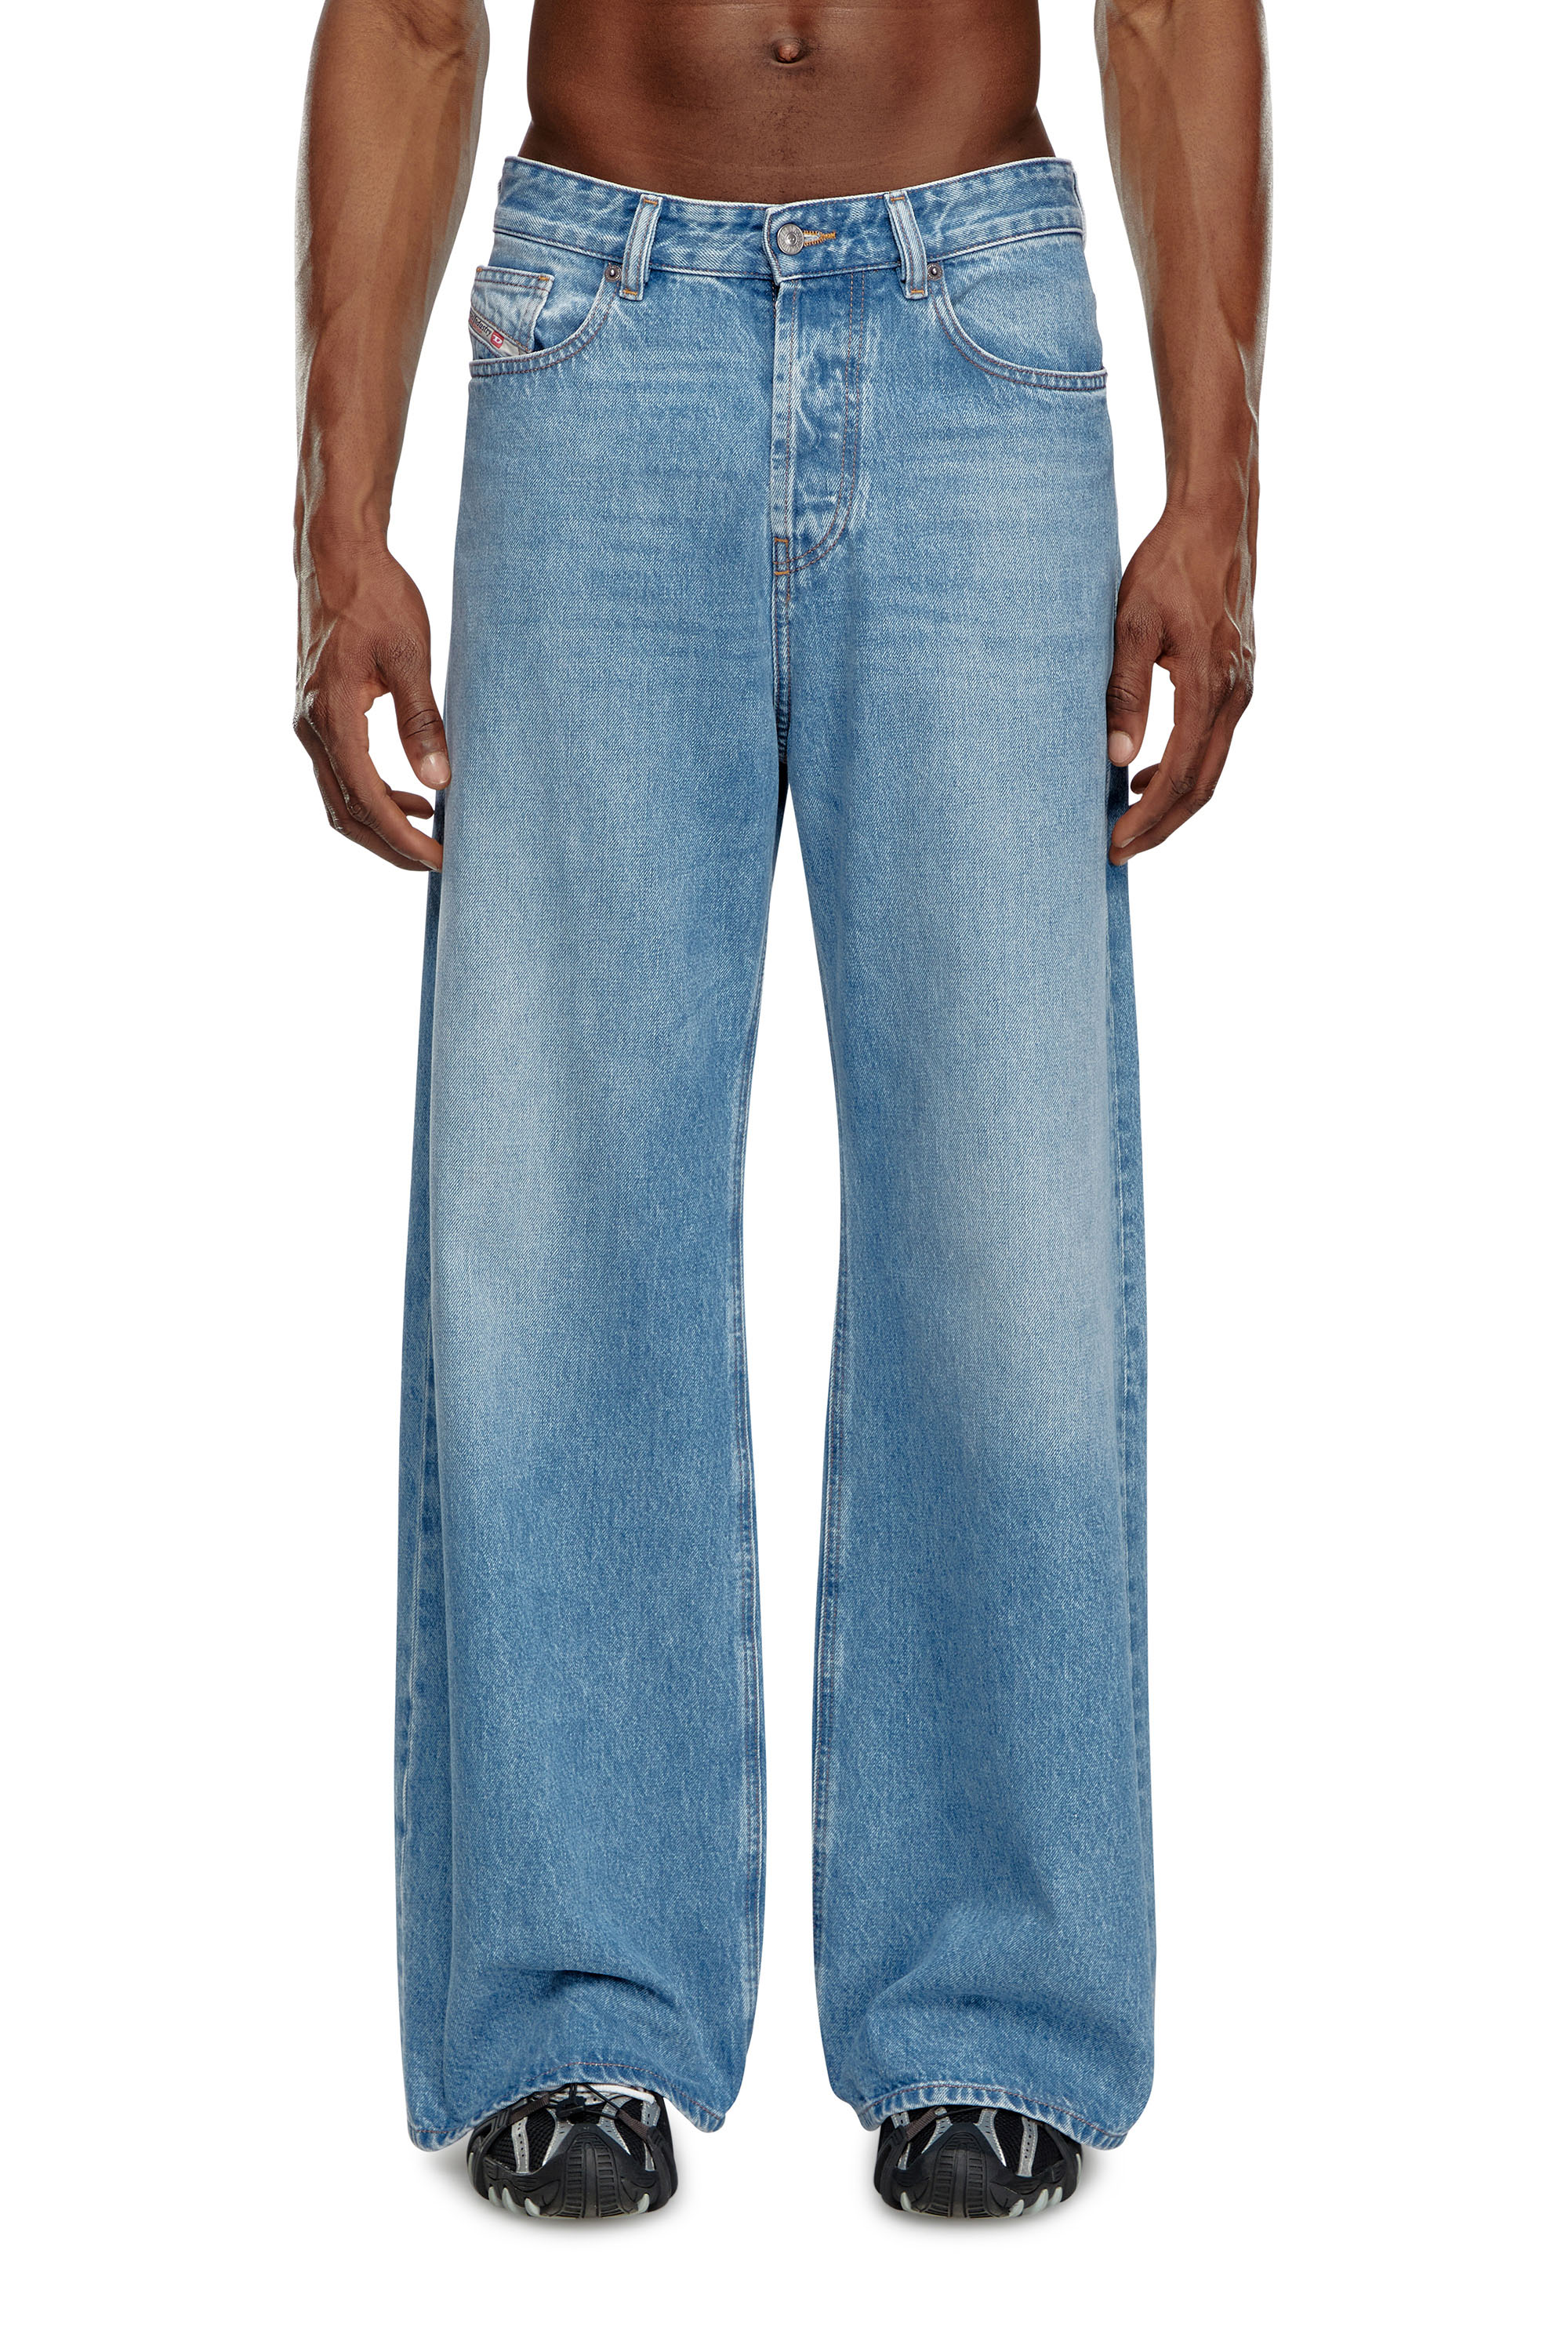 Diesel - Straight Jeans 1996 D-Sire 09I29, Mujer Straight Jeans - 1996 D-Sire in Azul marino - Image 6